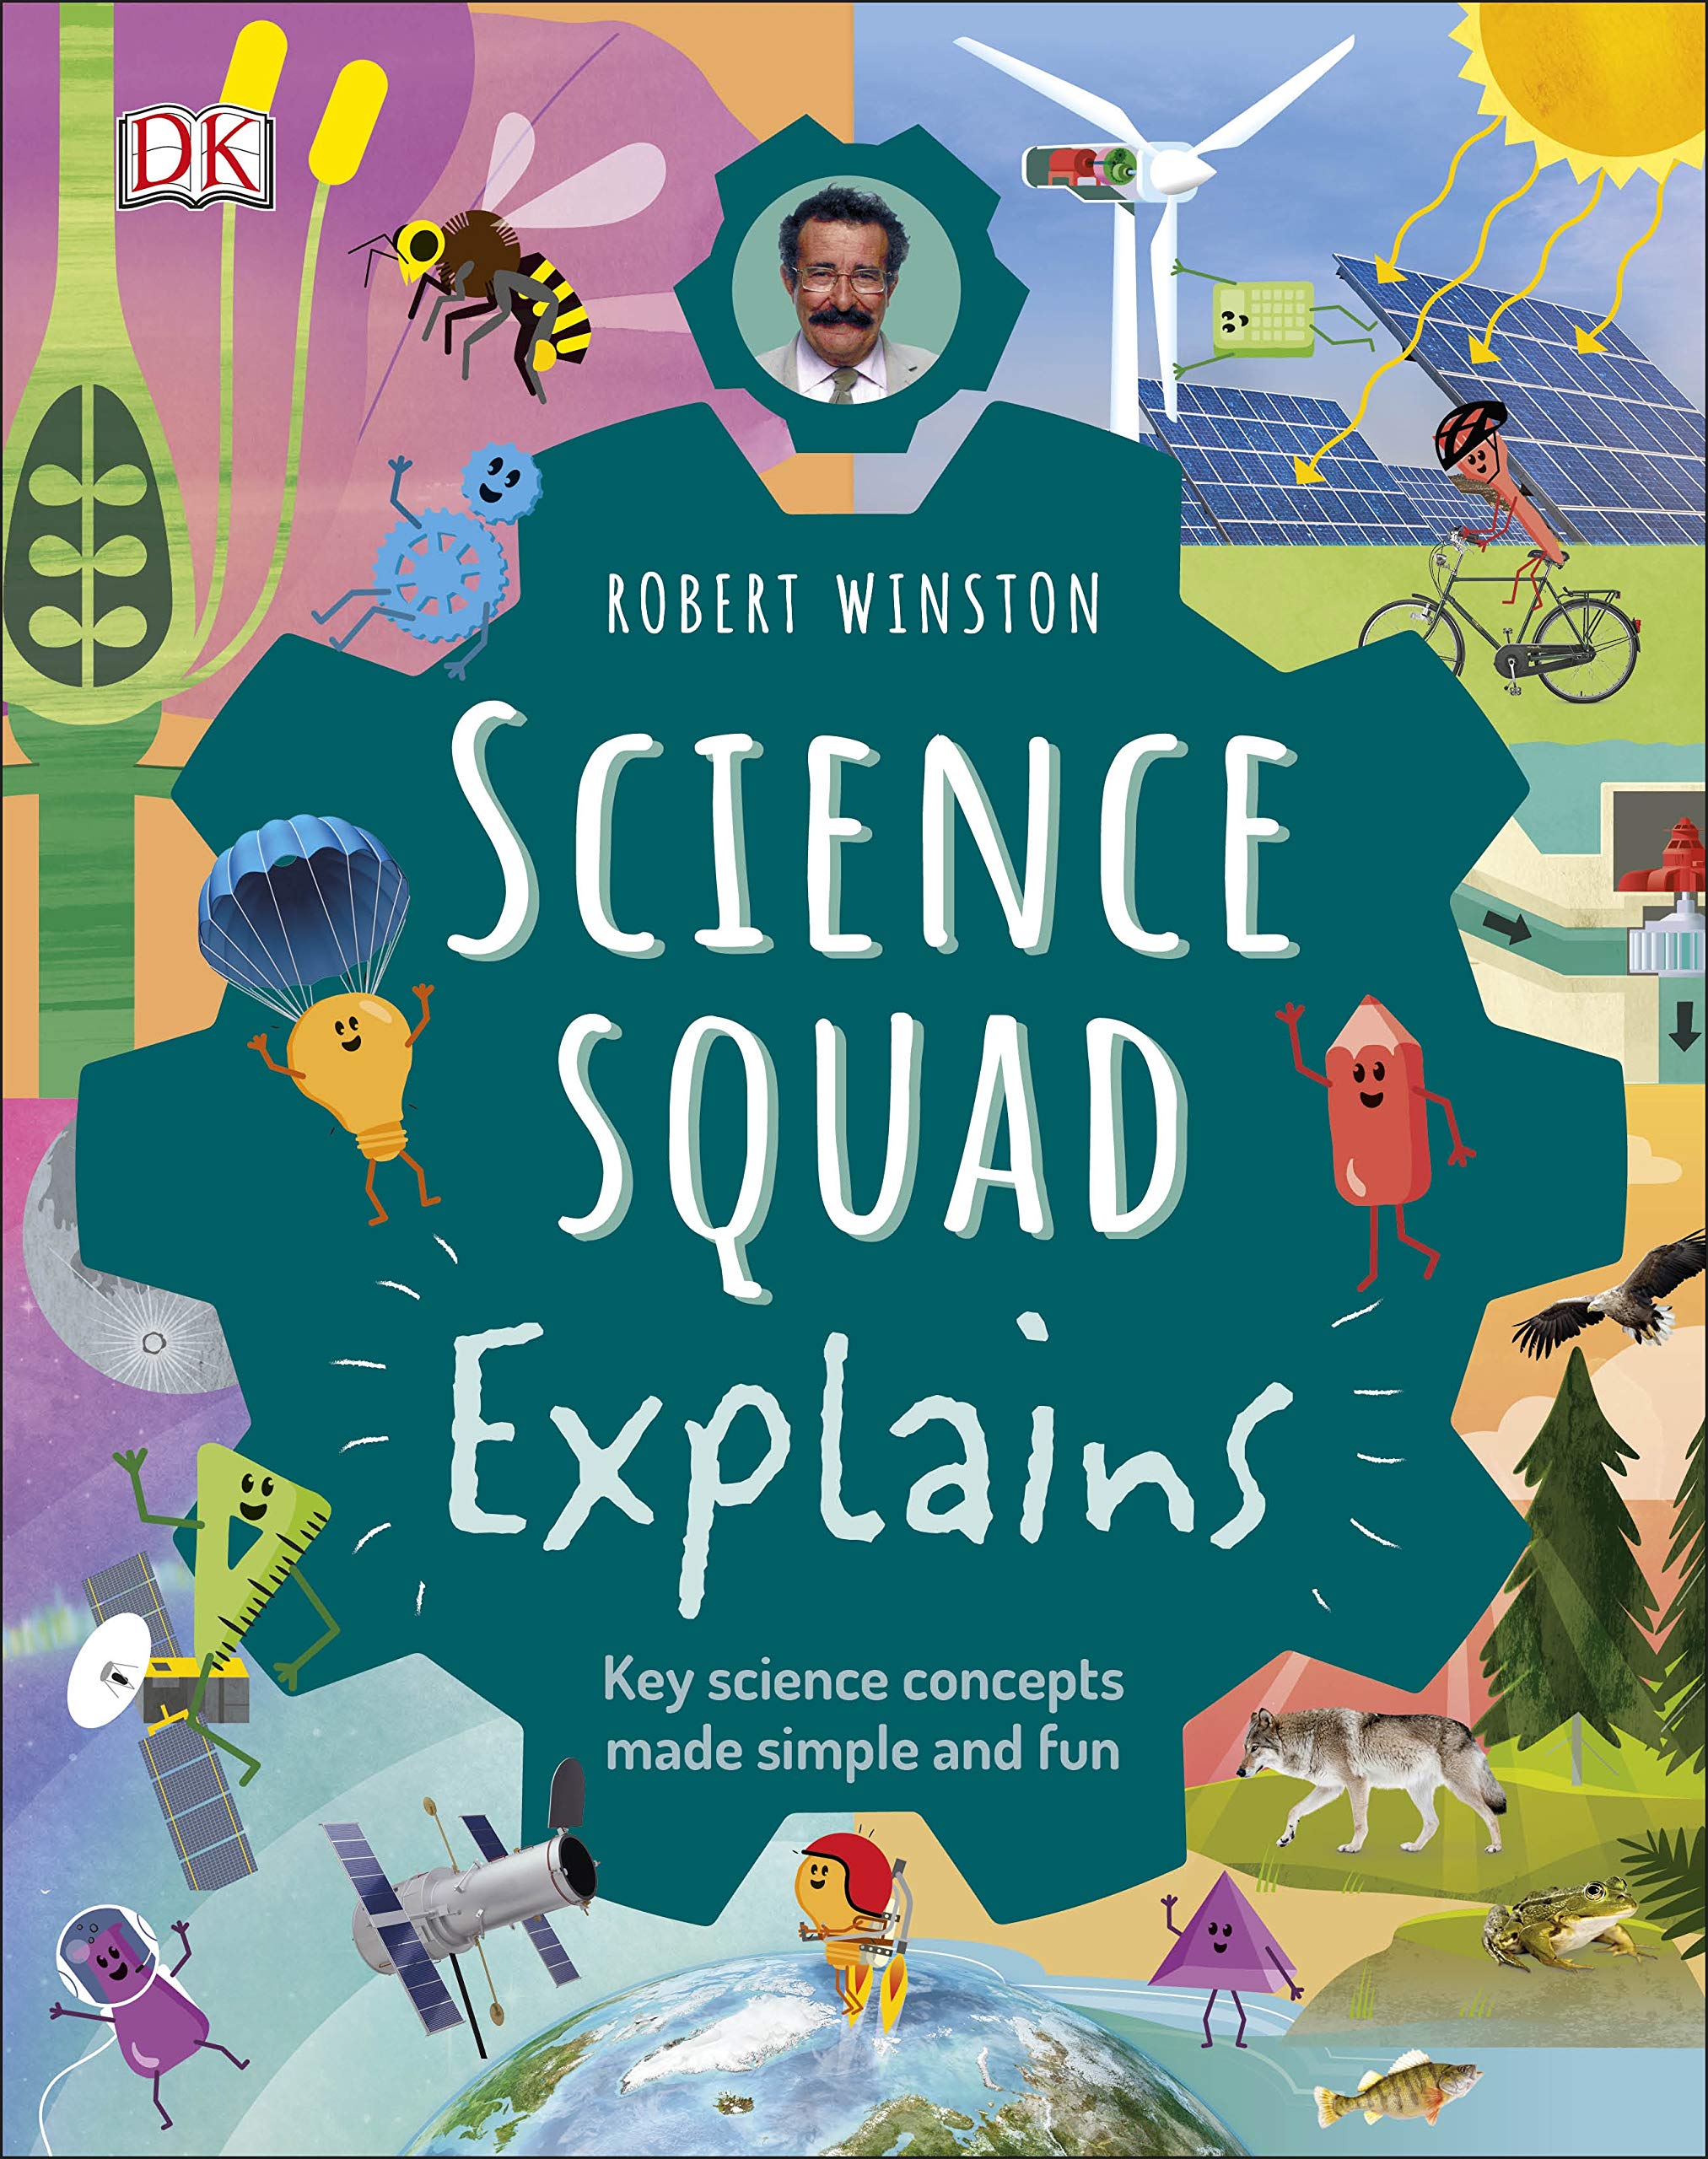 Robert Winston Science Squad Explains: Key Science Concepts Made Simple And Fun (Science Squad/The Steam Team)